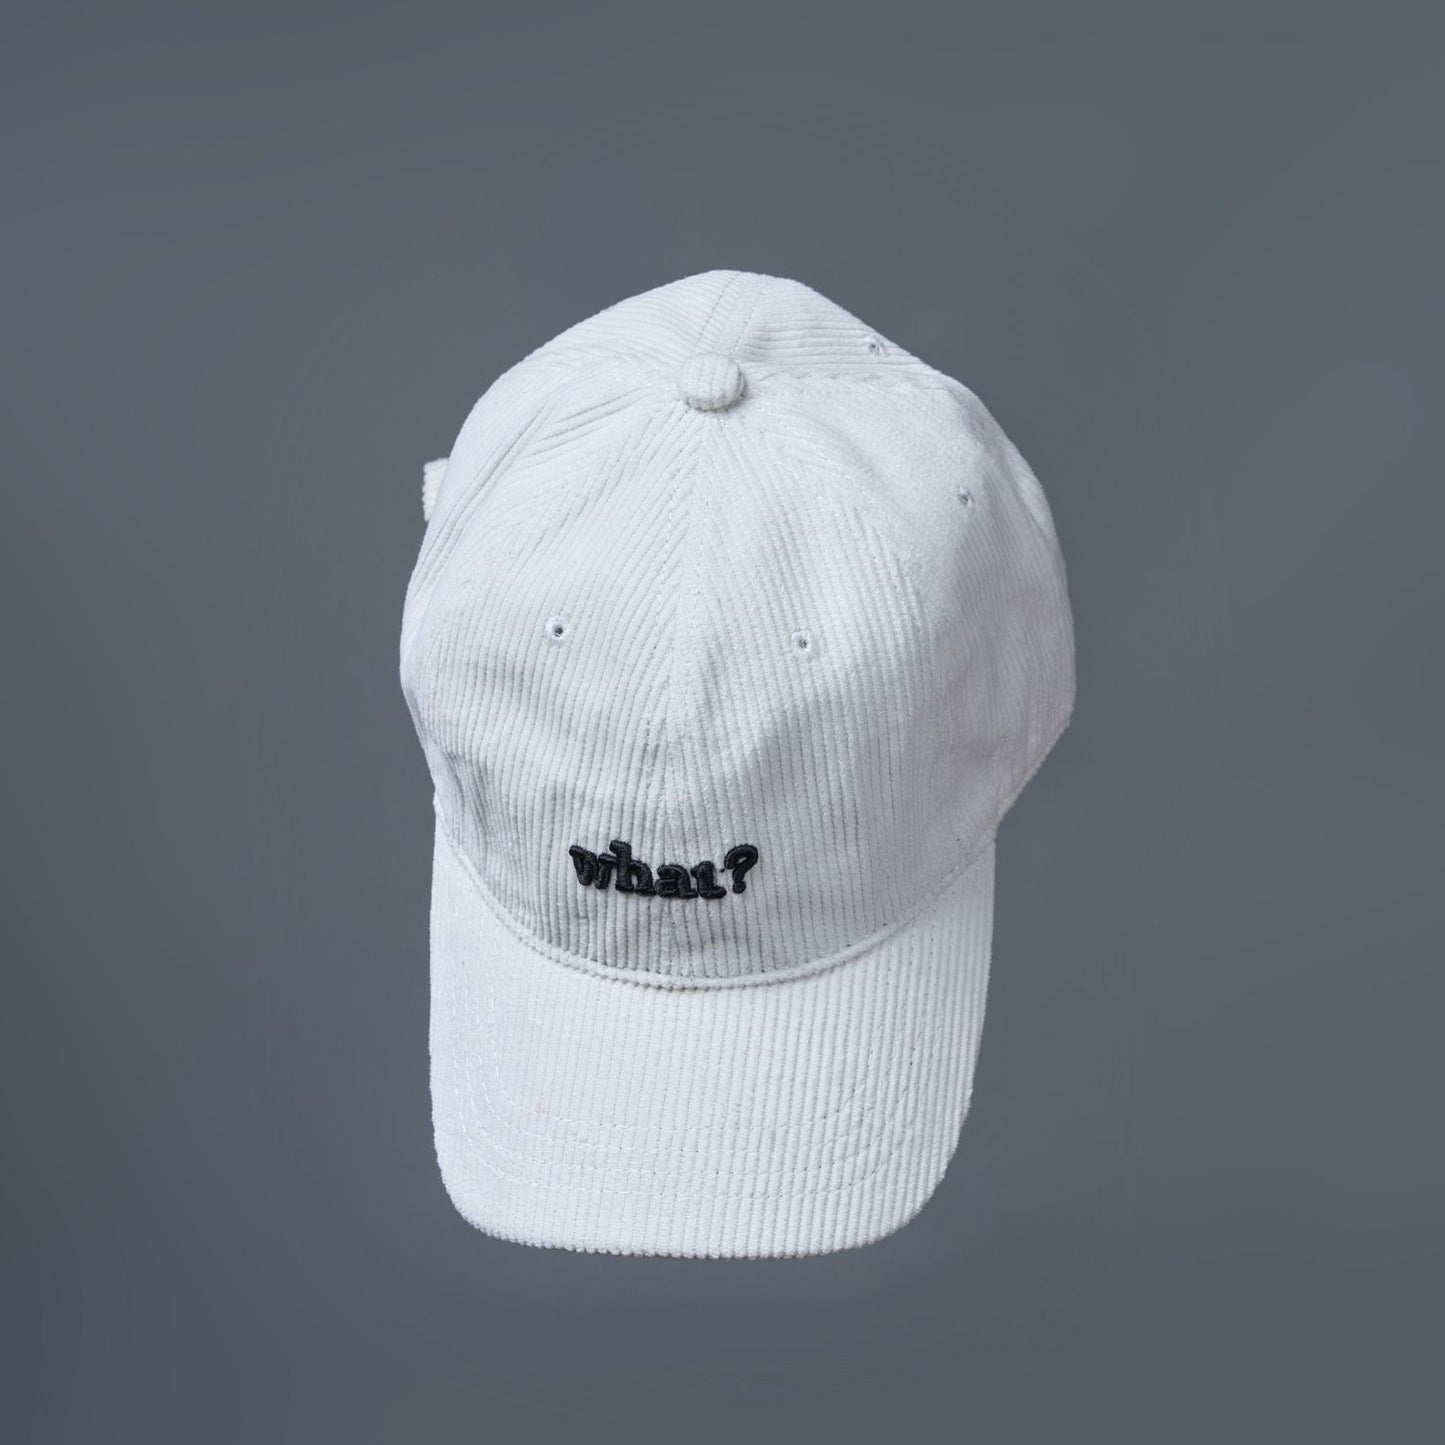 White colored cap for men with 'what' text written on it.